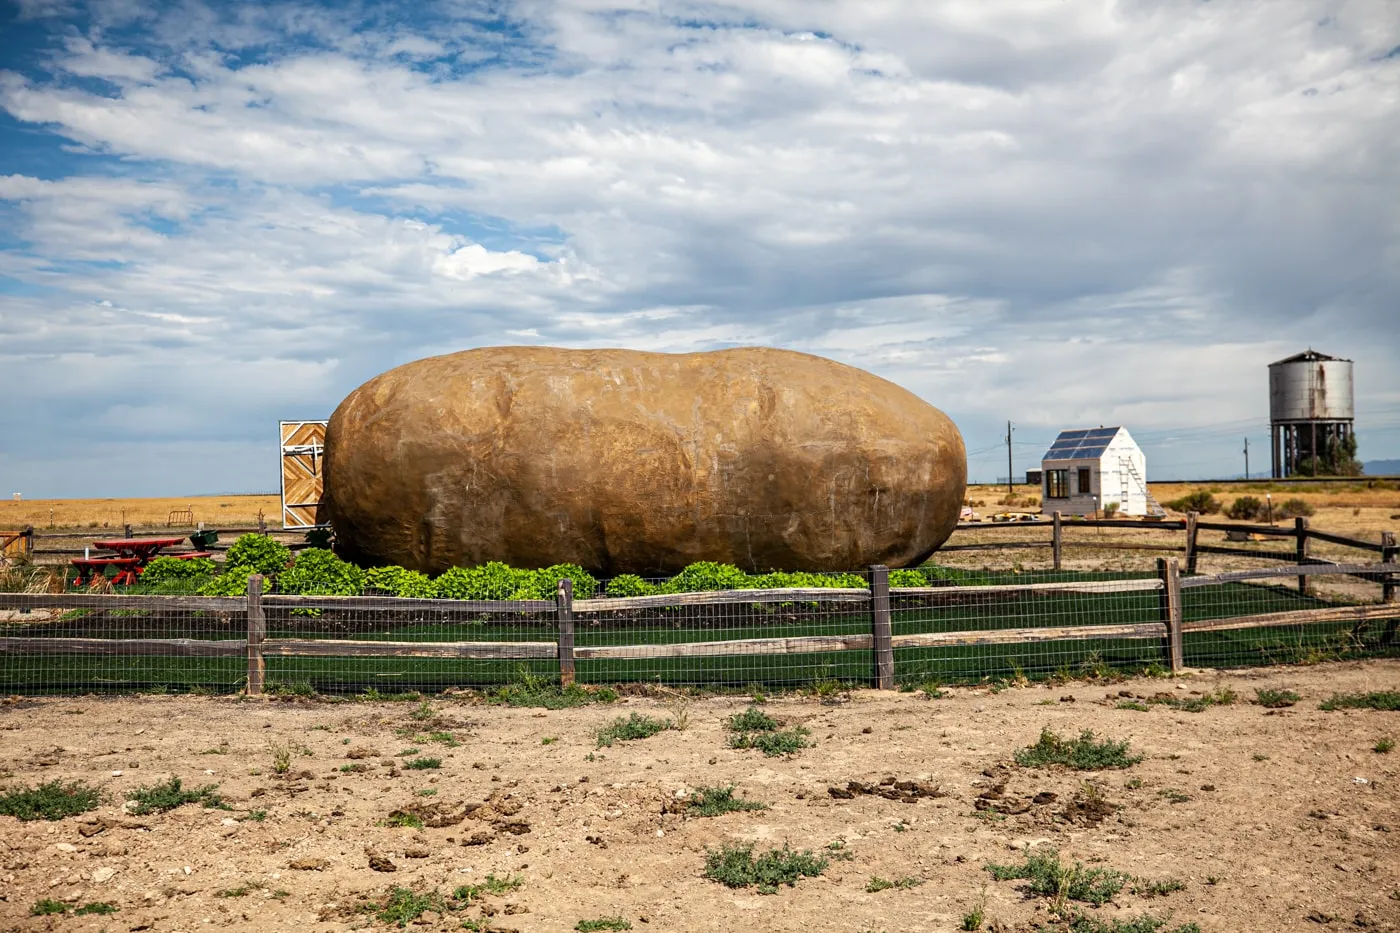 Big Idaho Potato Hotel AirBNB in Boise, Idaho - an AirBNB made from a giant potato | Idaho Roadside Attractions and Weird Hotels